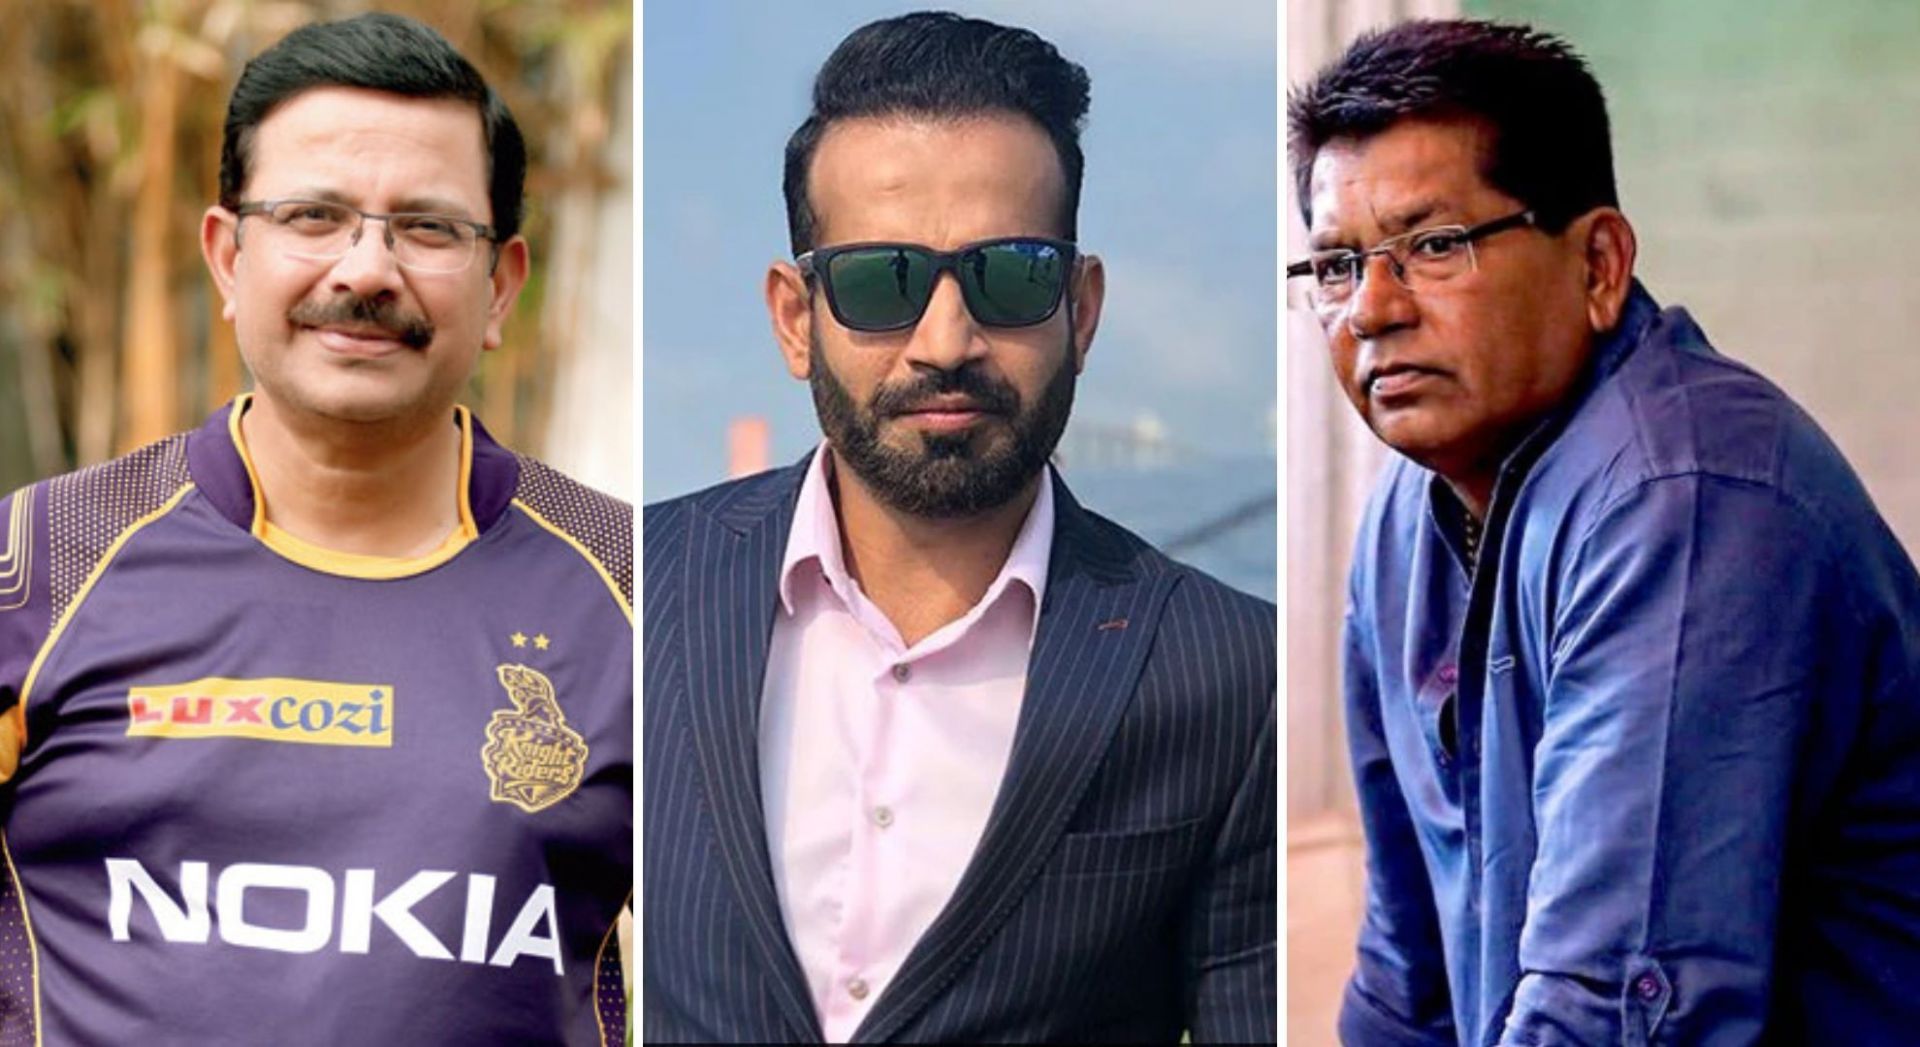 Venky Mysore credits Irfan Pathan for suggesting Chandrakant Pandit in IPL.